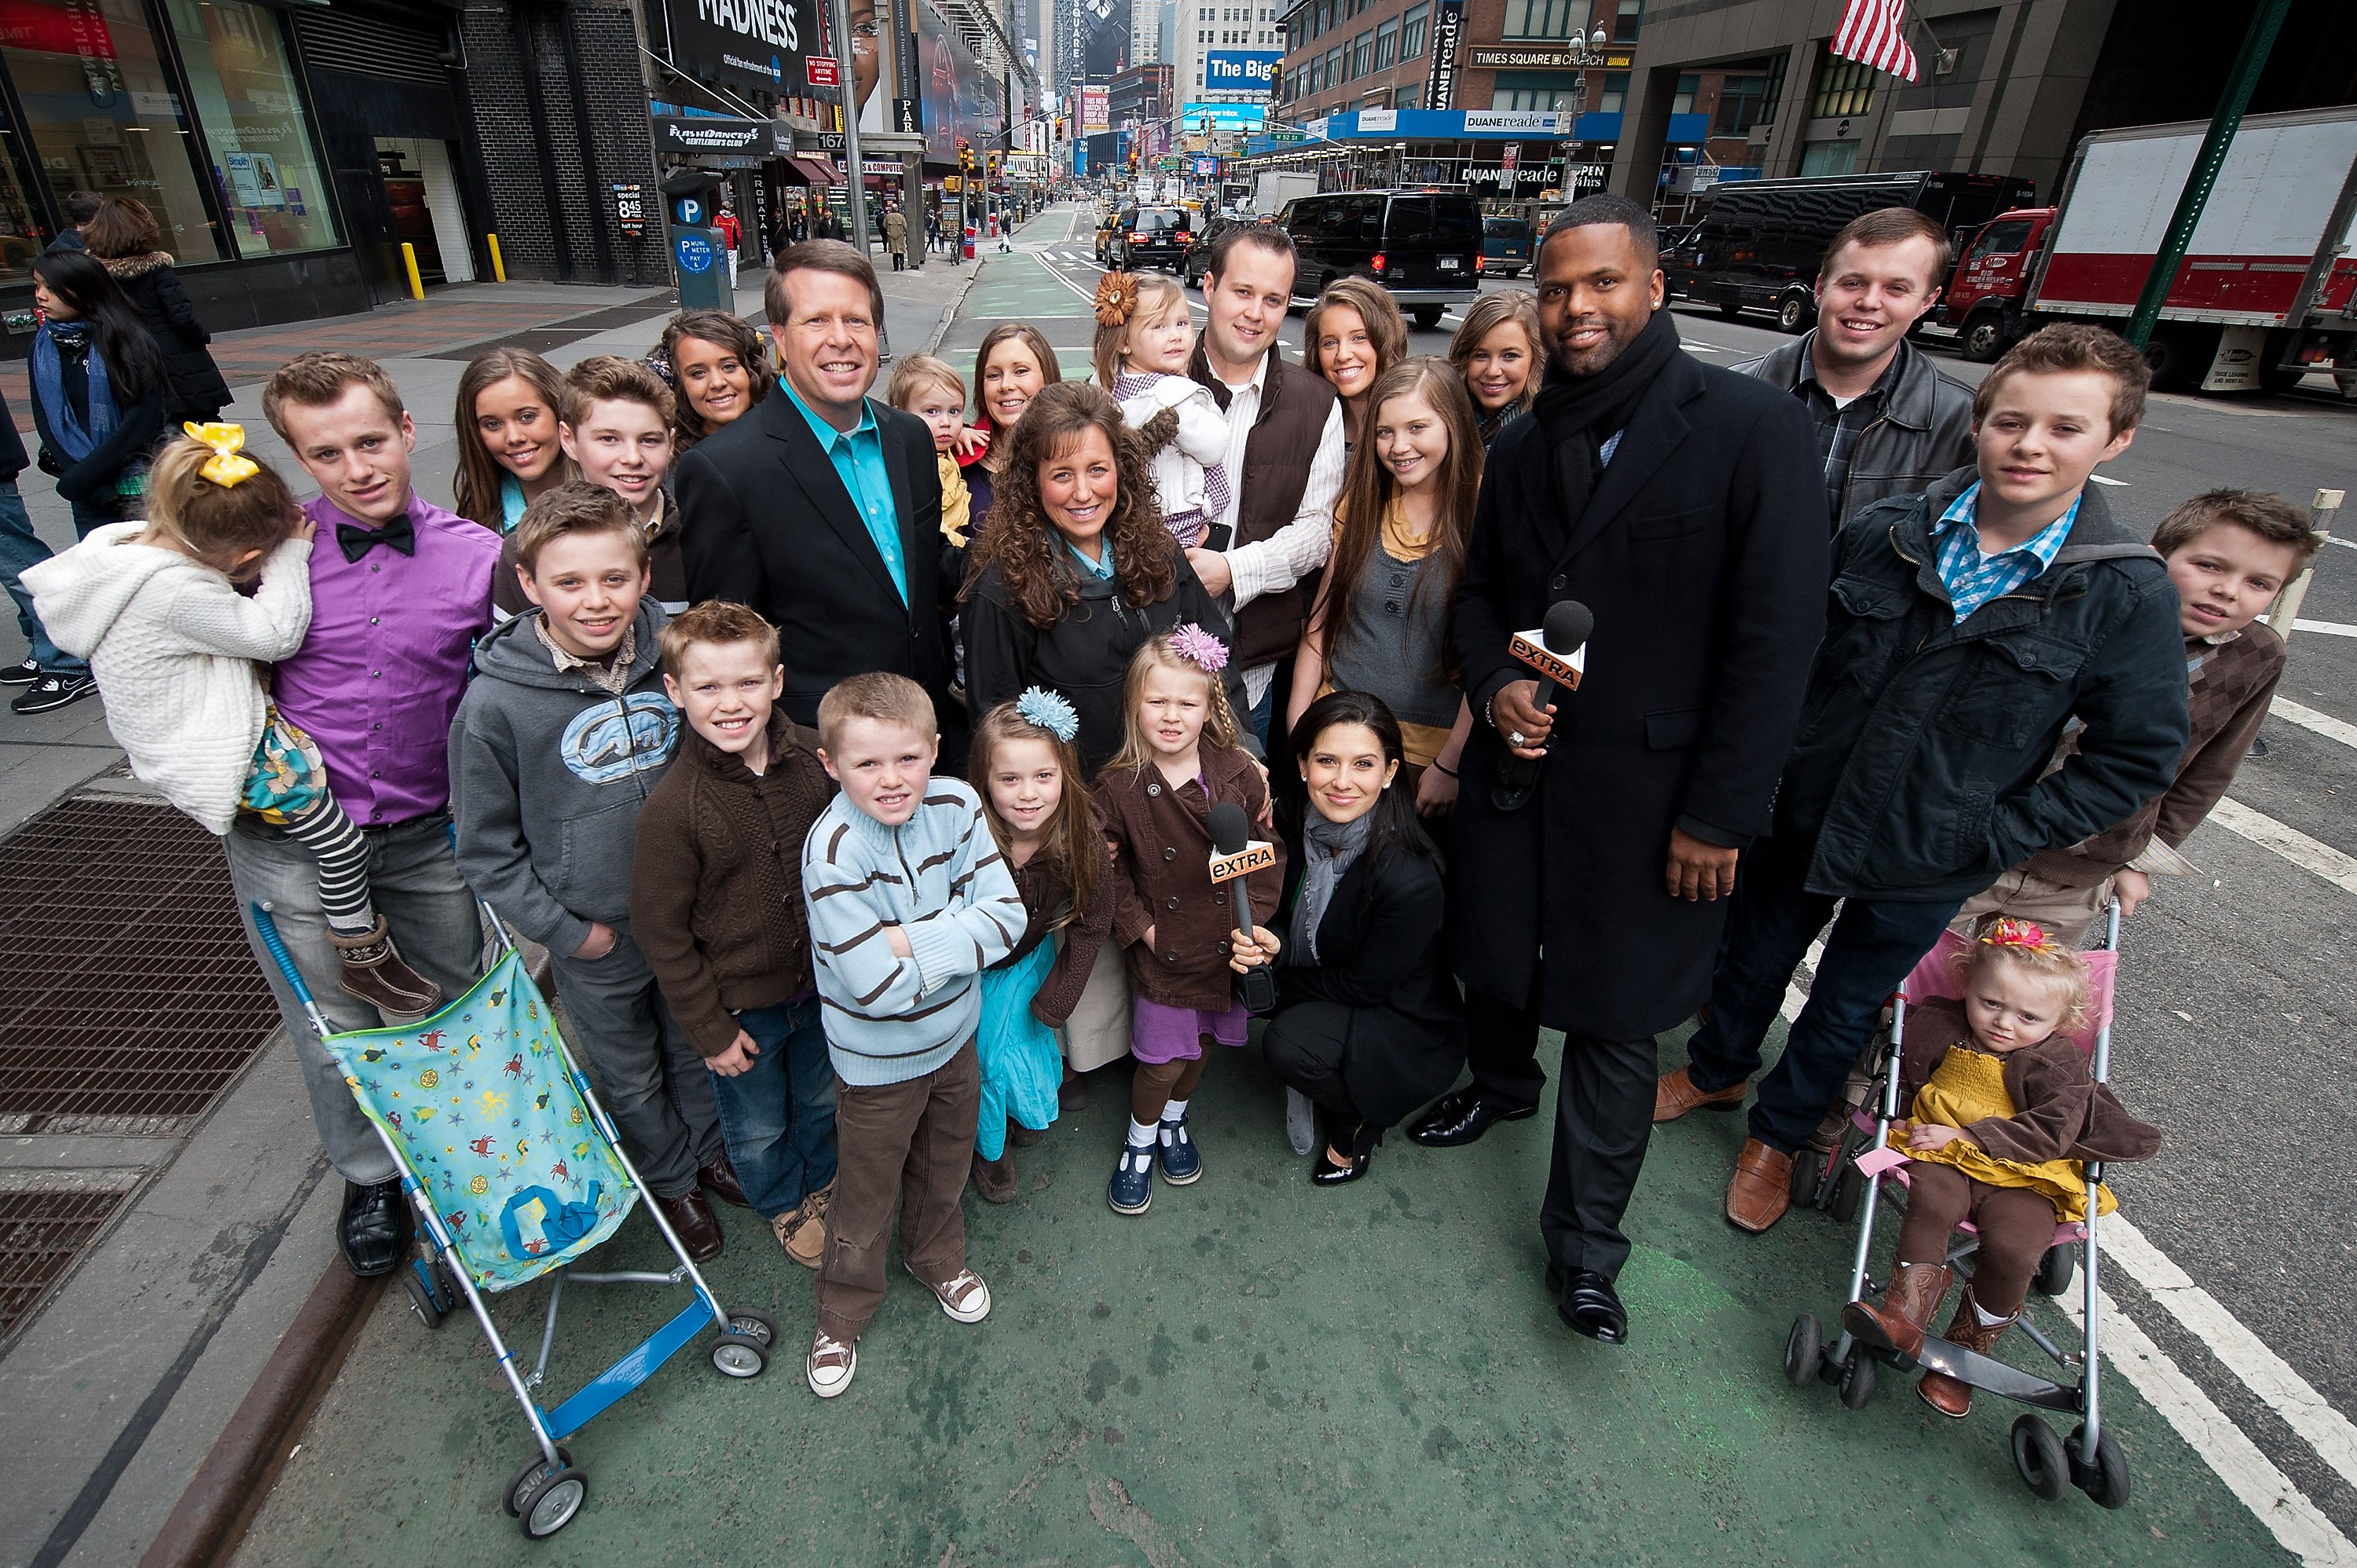 AJ Calloway and Hilaria Baldwin pose with the Duggar family in Time Square in March 2013